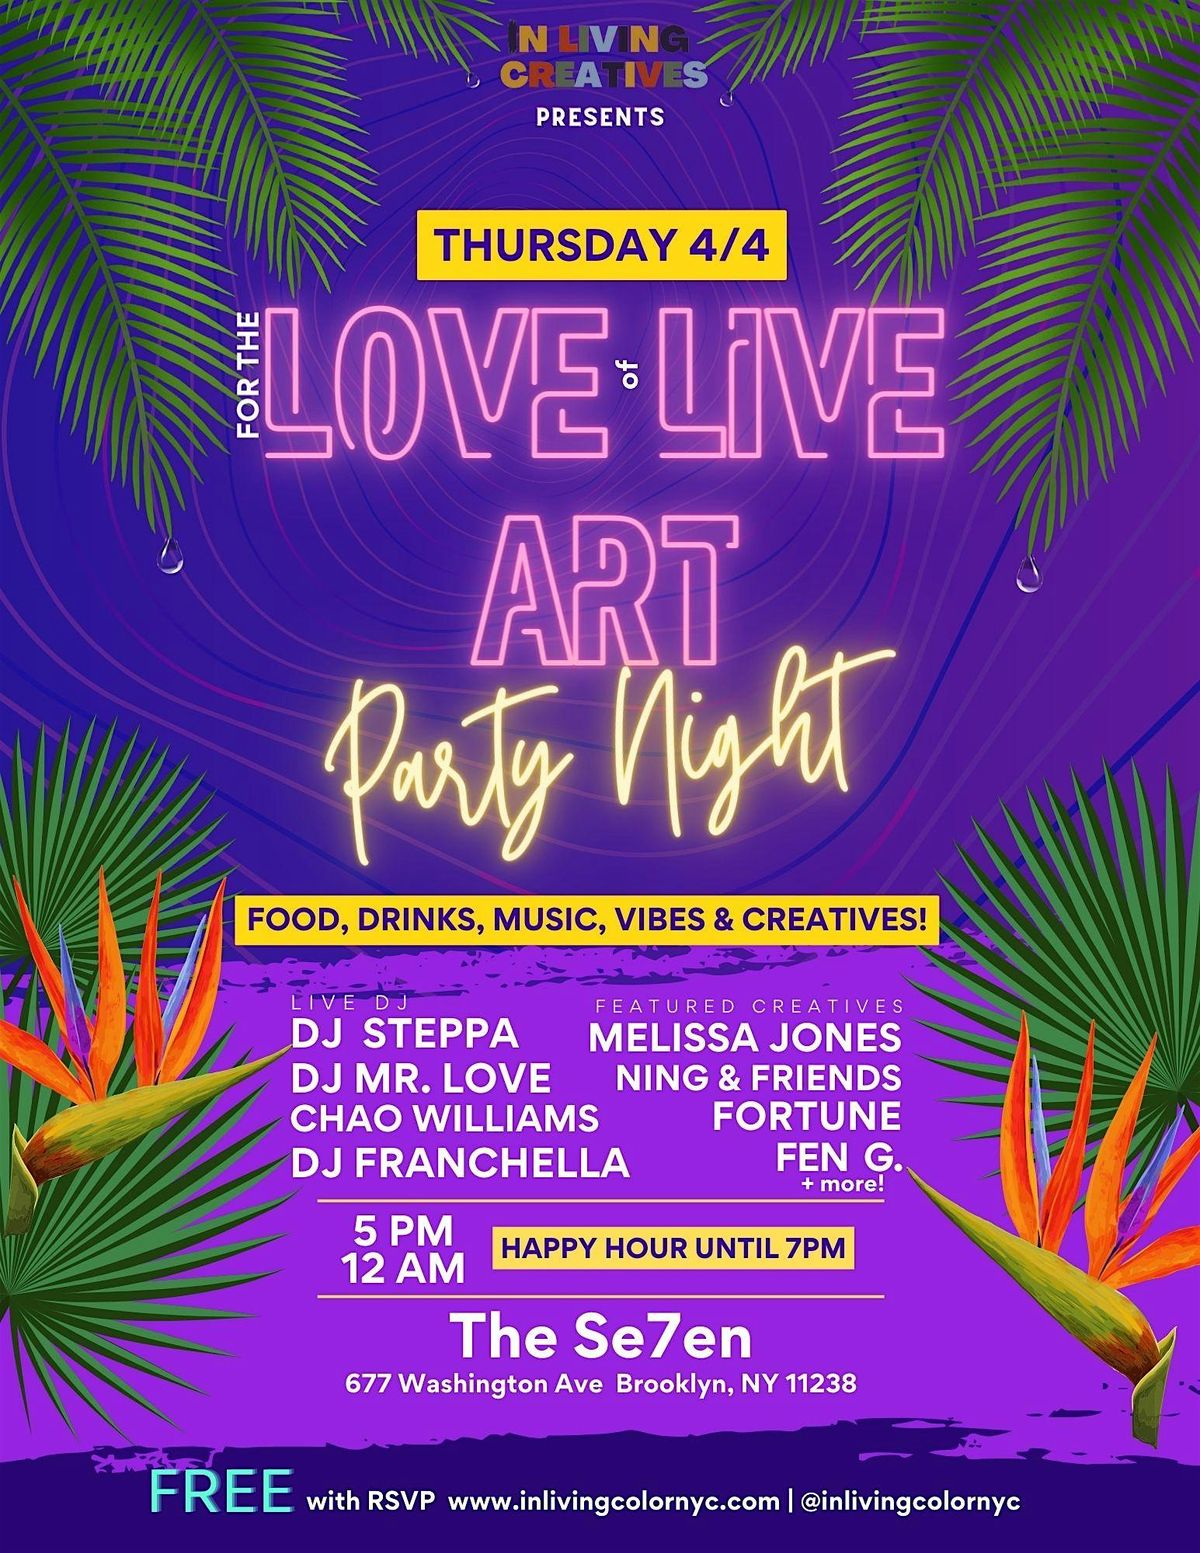 Love & Live Art Creatives Party